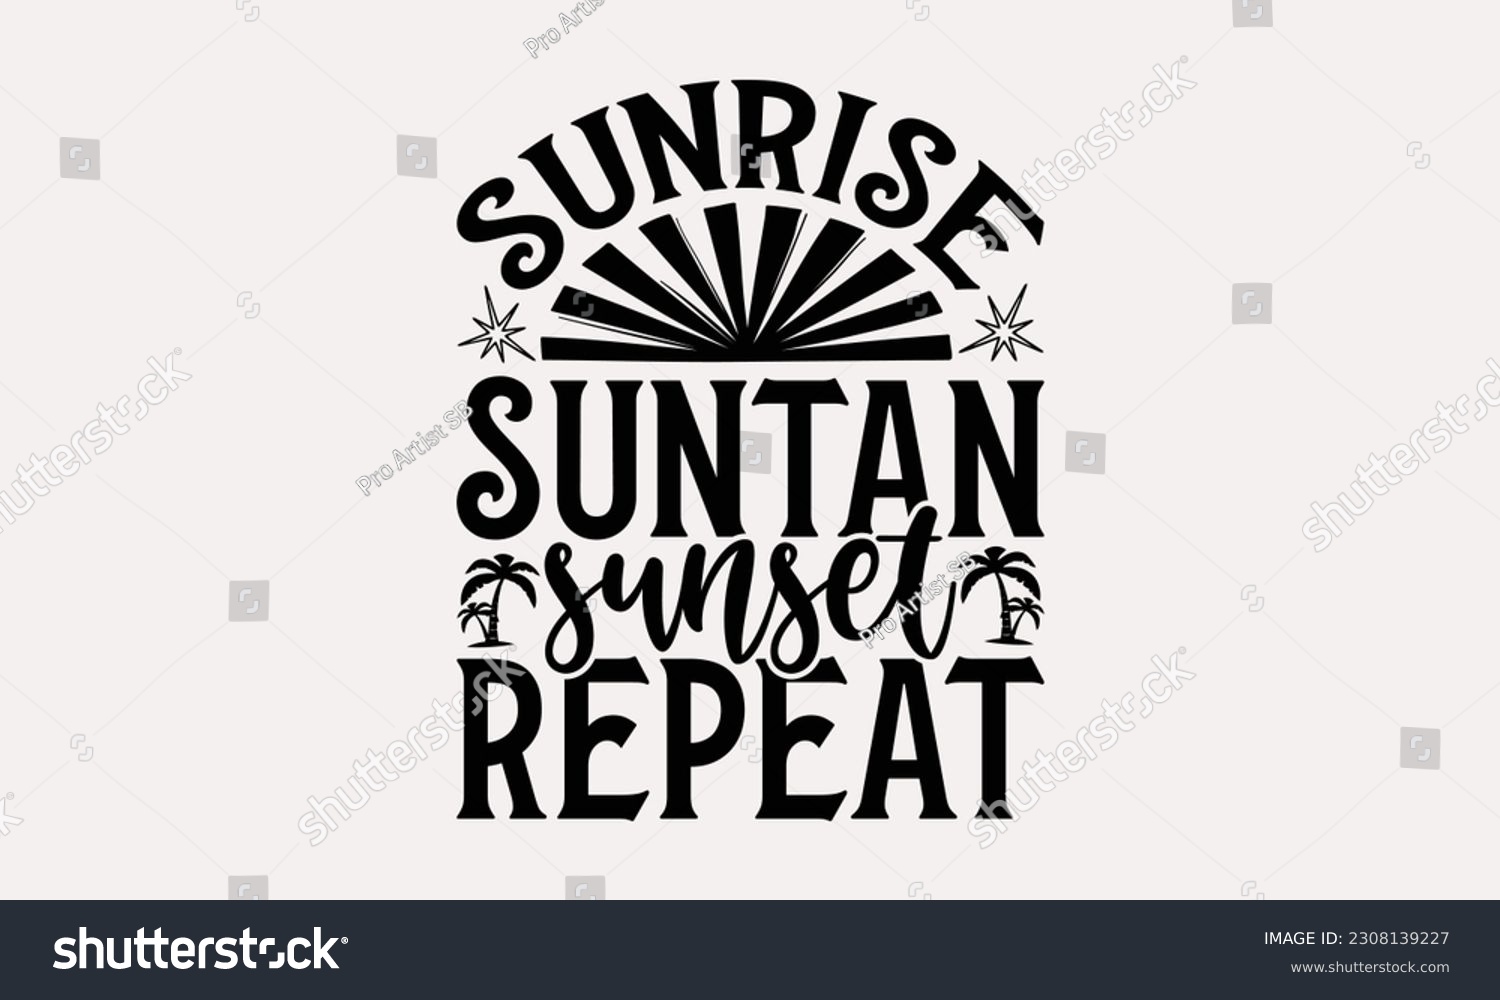 SVG of Sunrise suntan sunset repeat - Summer T-shirt Design, Funny Beach Quotes SVG, Isolated On White Background, Greeting Card Template with Typography Text. svg